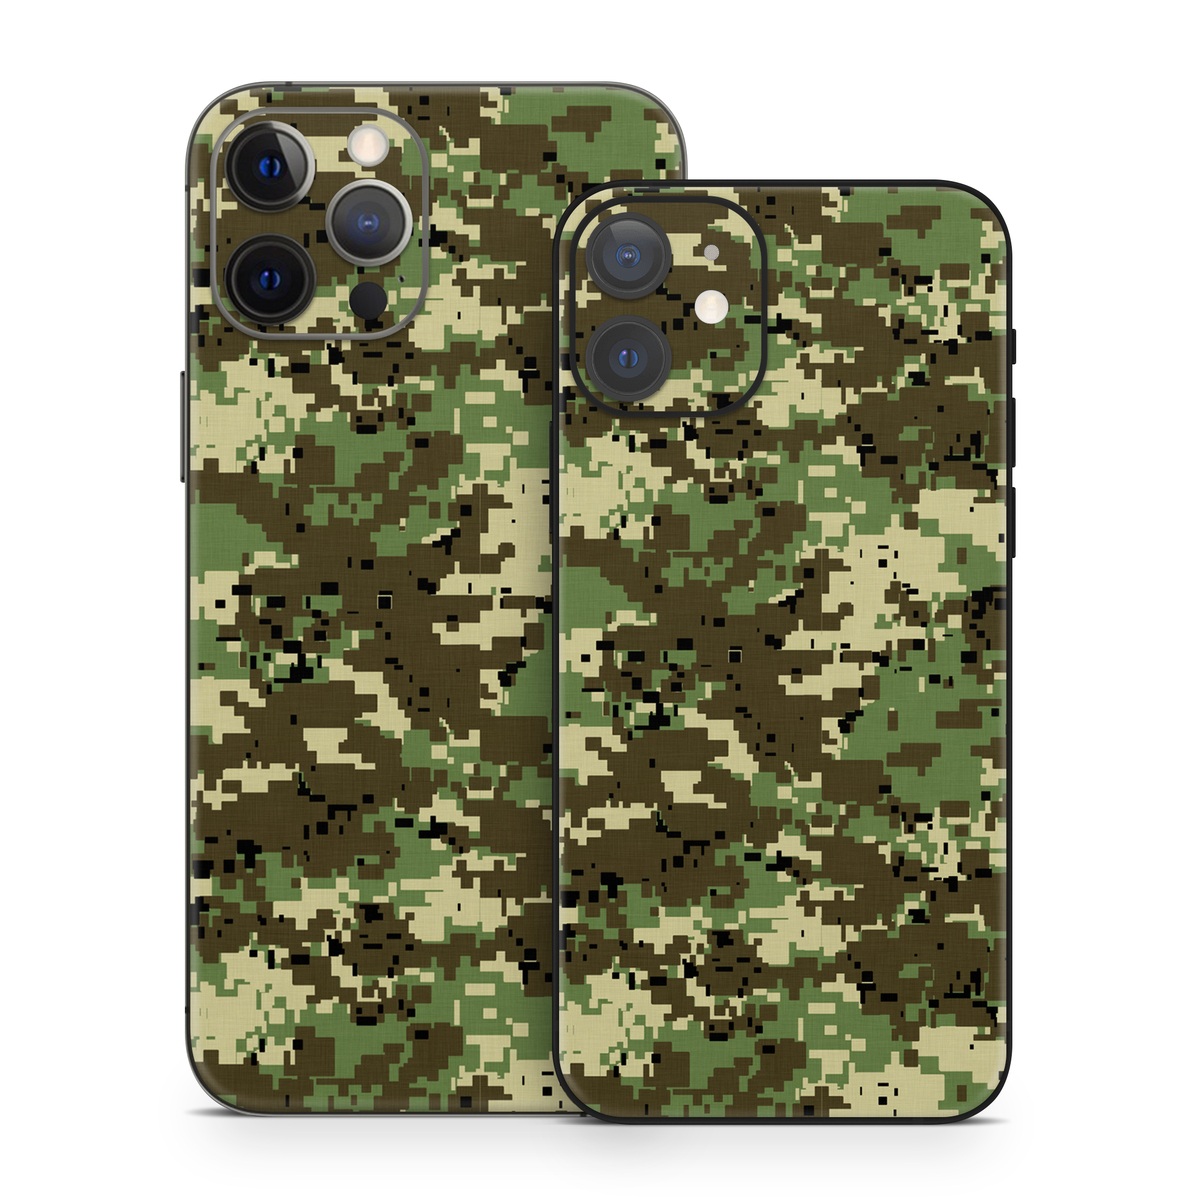 iPhone 12 Skin design of Military camouflage, Pattern, Camouflage, Green, Uniform, Clothing, Design, Military uniform with black, gray, green colors